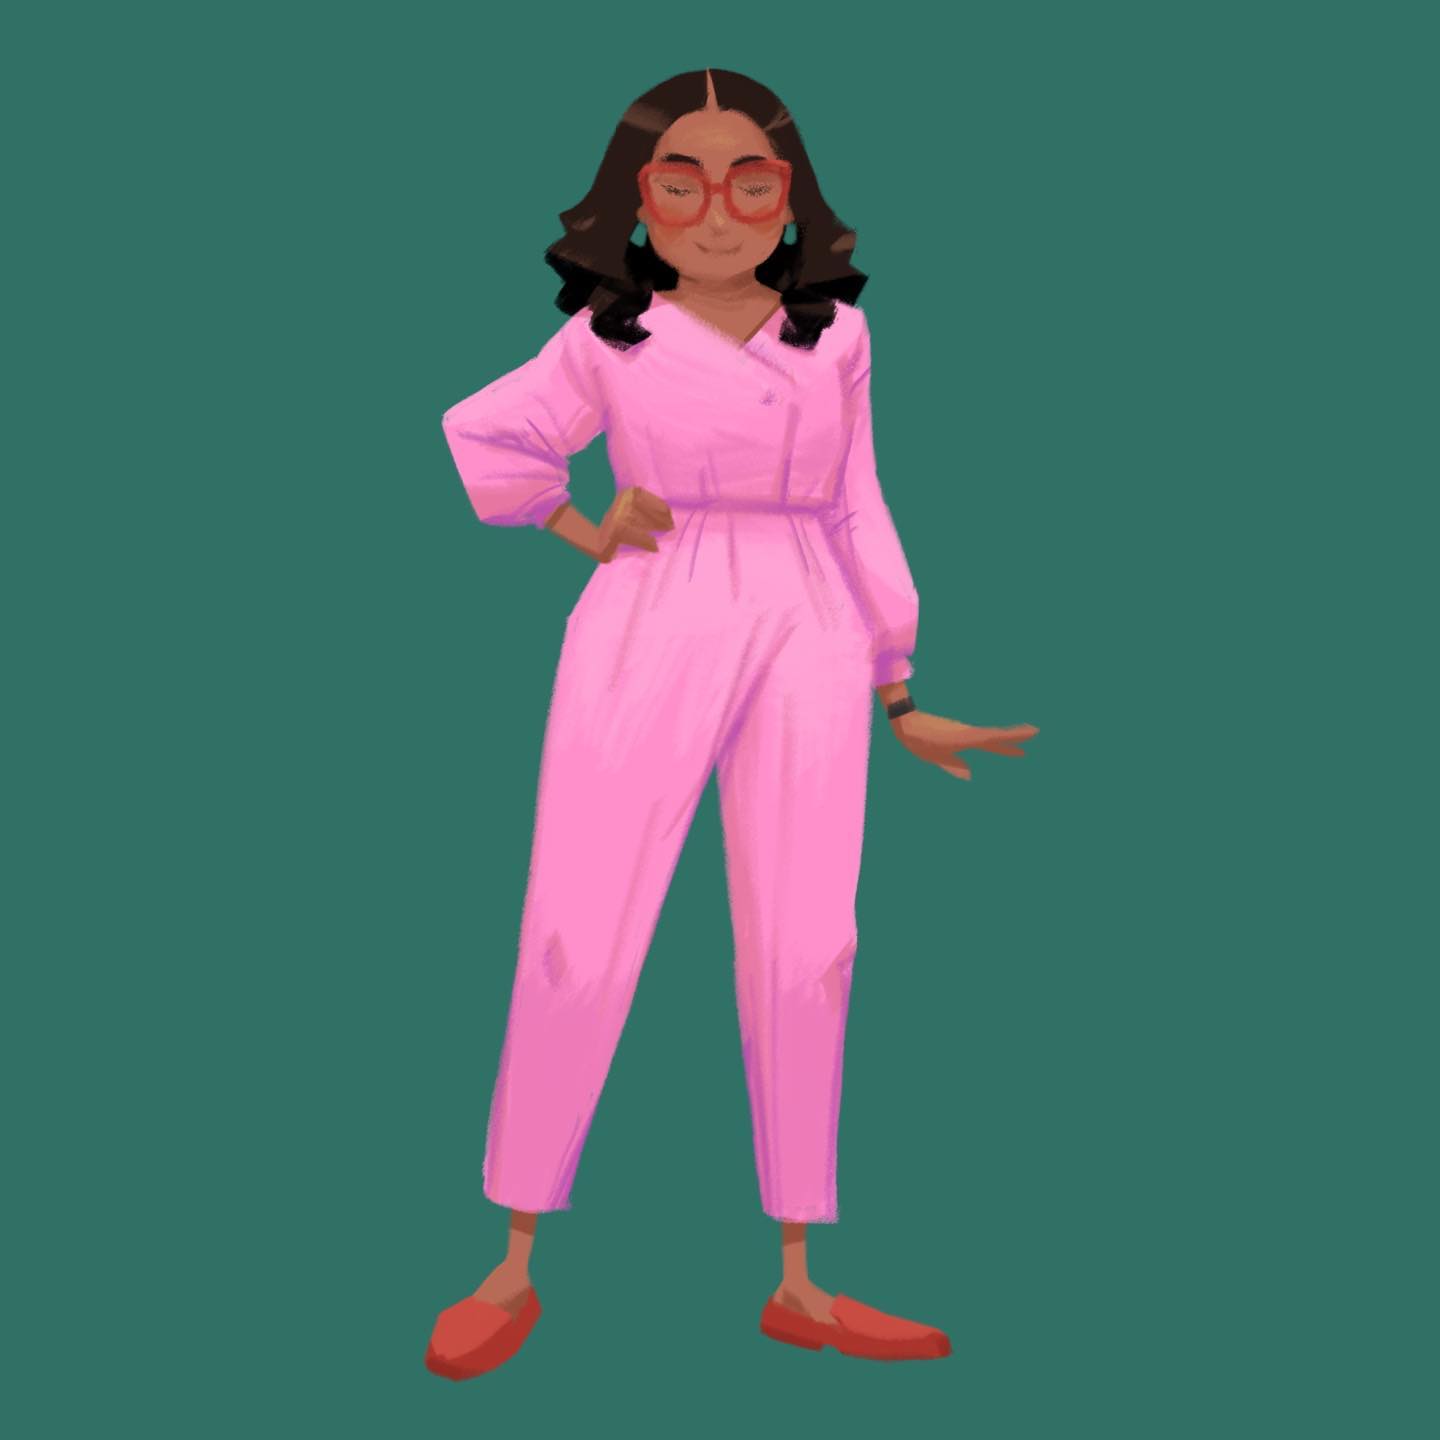 Black stylish woman wearing pink jumpsuit and red glasses in a green background